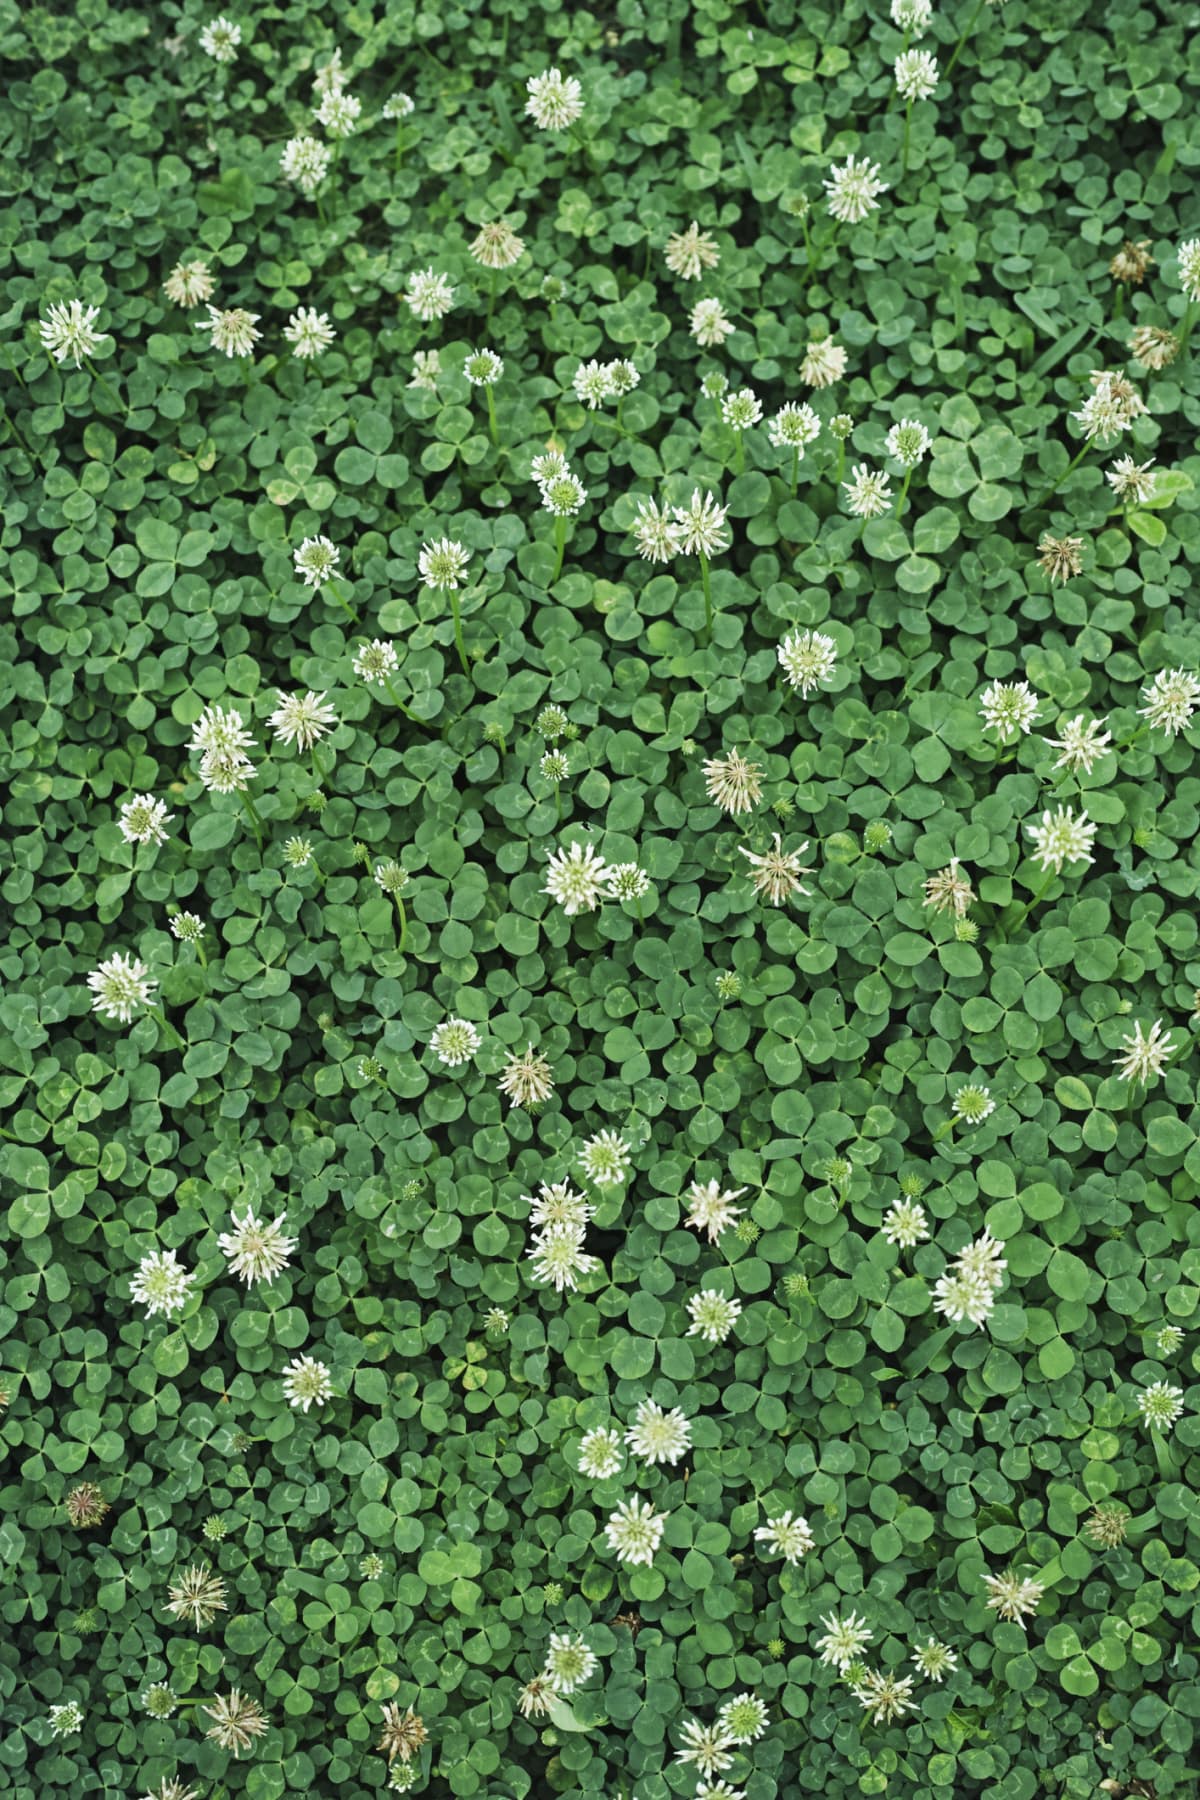 A thriving clover lawn